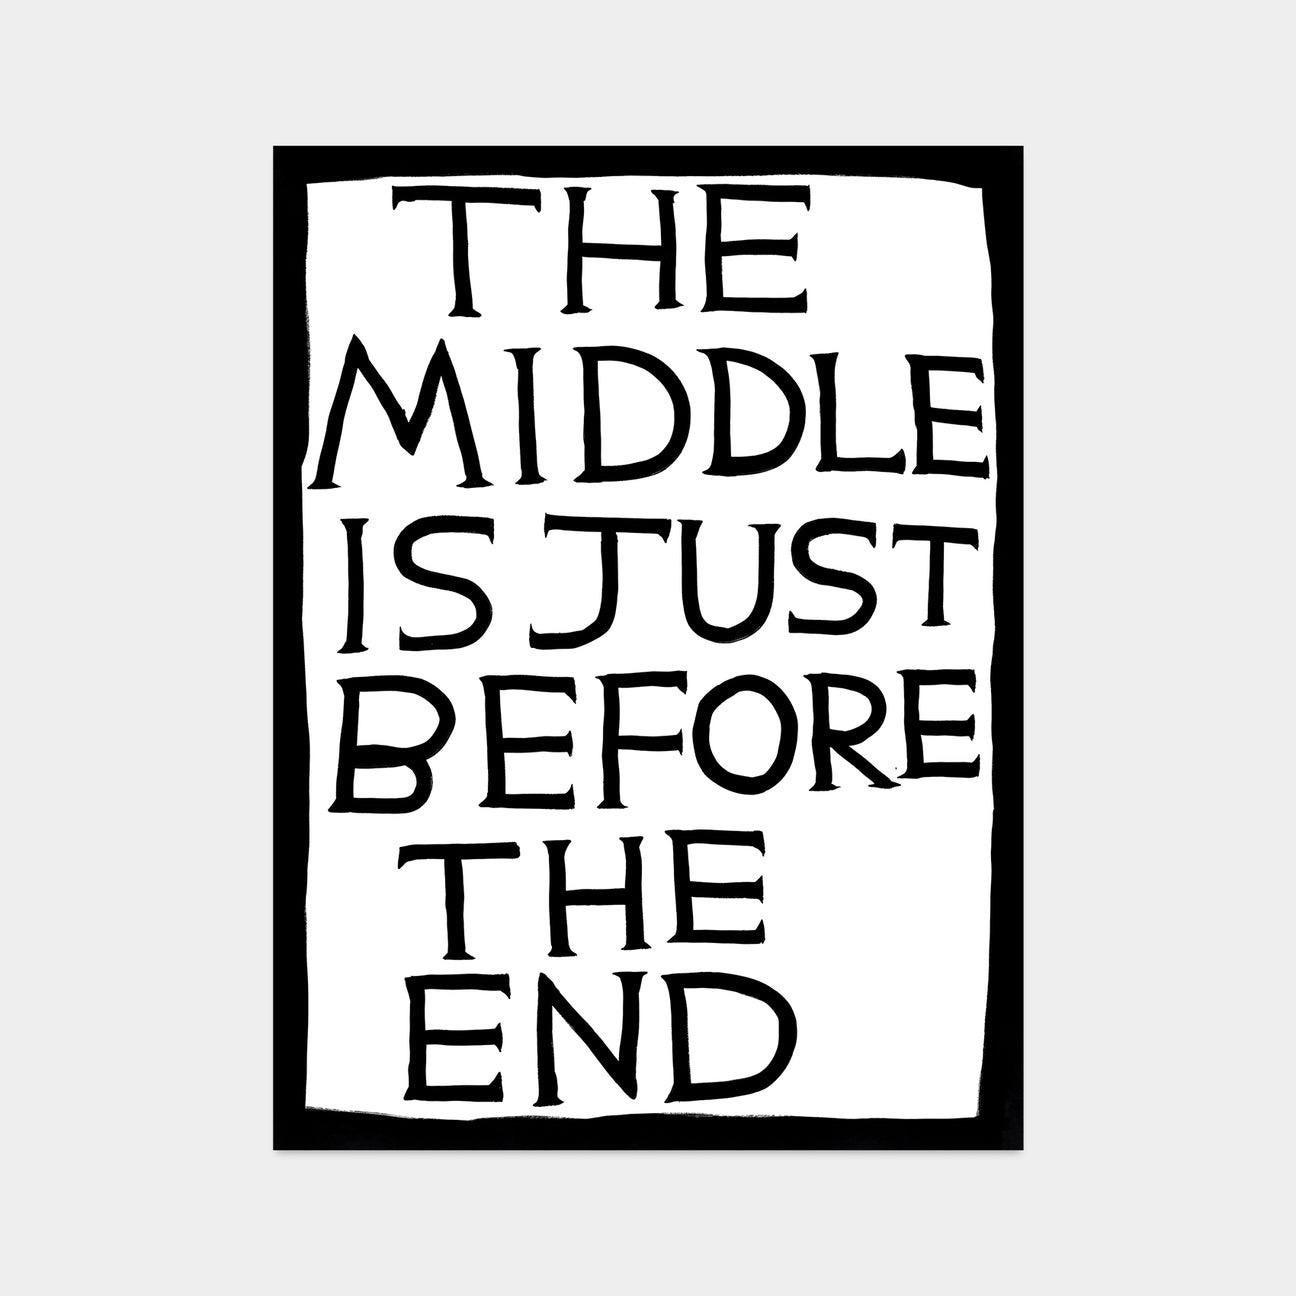 David Shrigley, The Middle Is Just Before The End, 2022

Off-set lithograph
Open edition, unframed 
50 x 70 cm (19.68 x 27.55 in) 
Printed on 200g Munken Lynx paper Narayana Press in Denmark

This print is based on the original acrylic work on paper